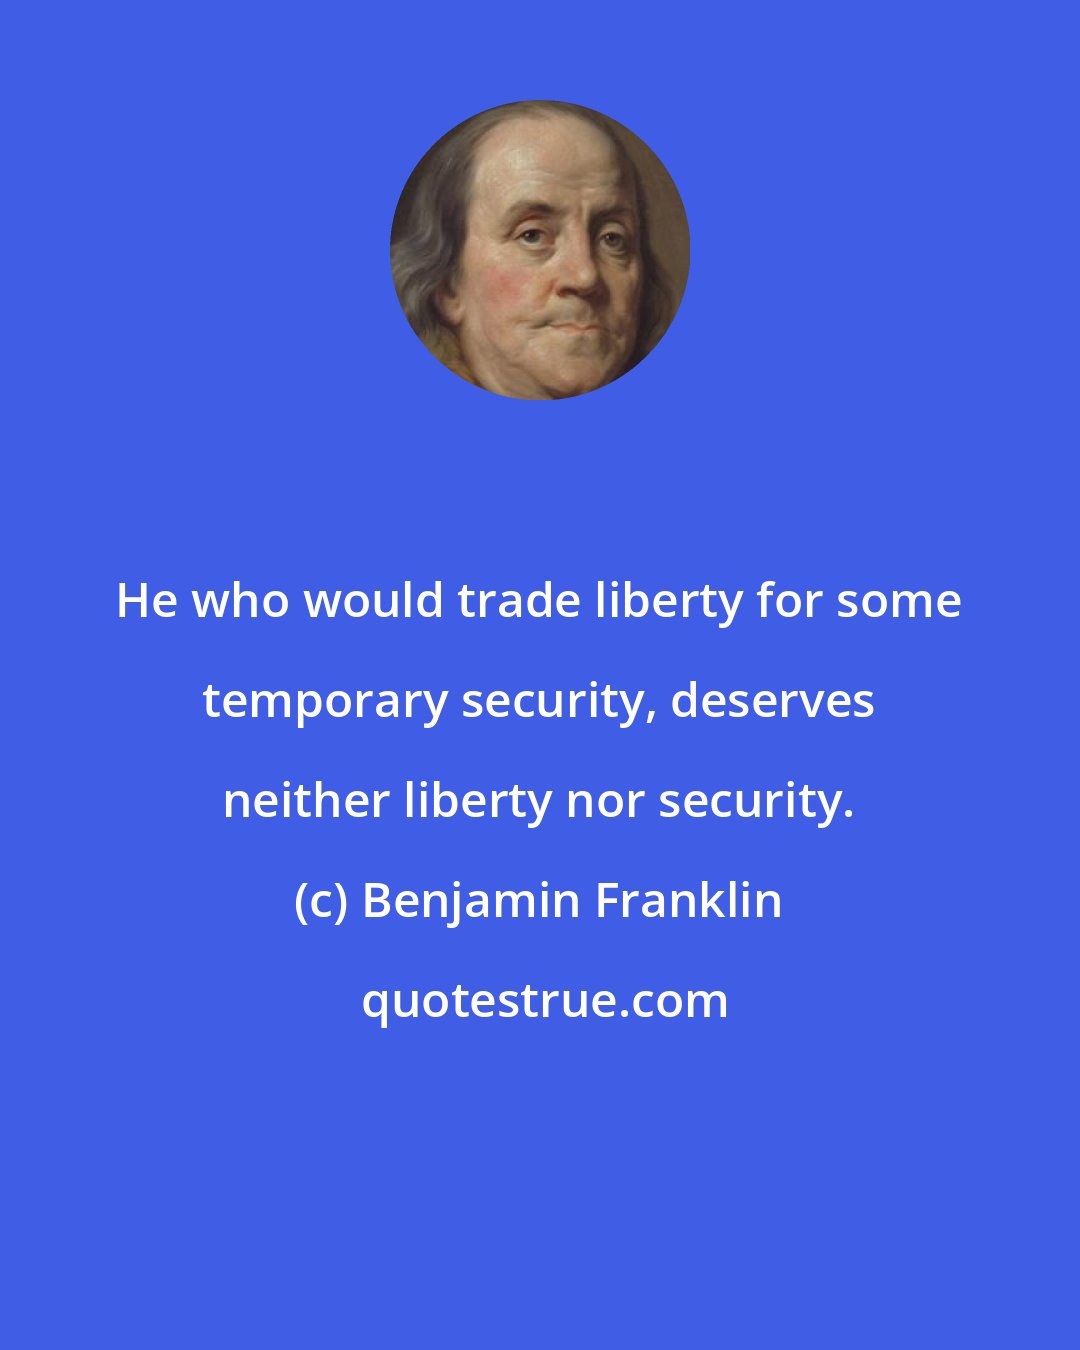 Benjamin Franklin: He who would trade liberty for some temporary security, deserves neither liberty nor security.